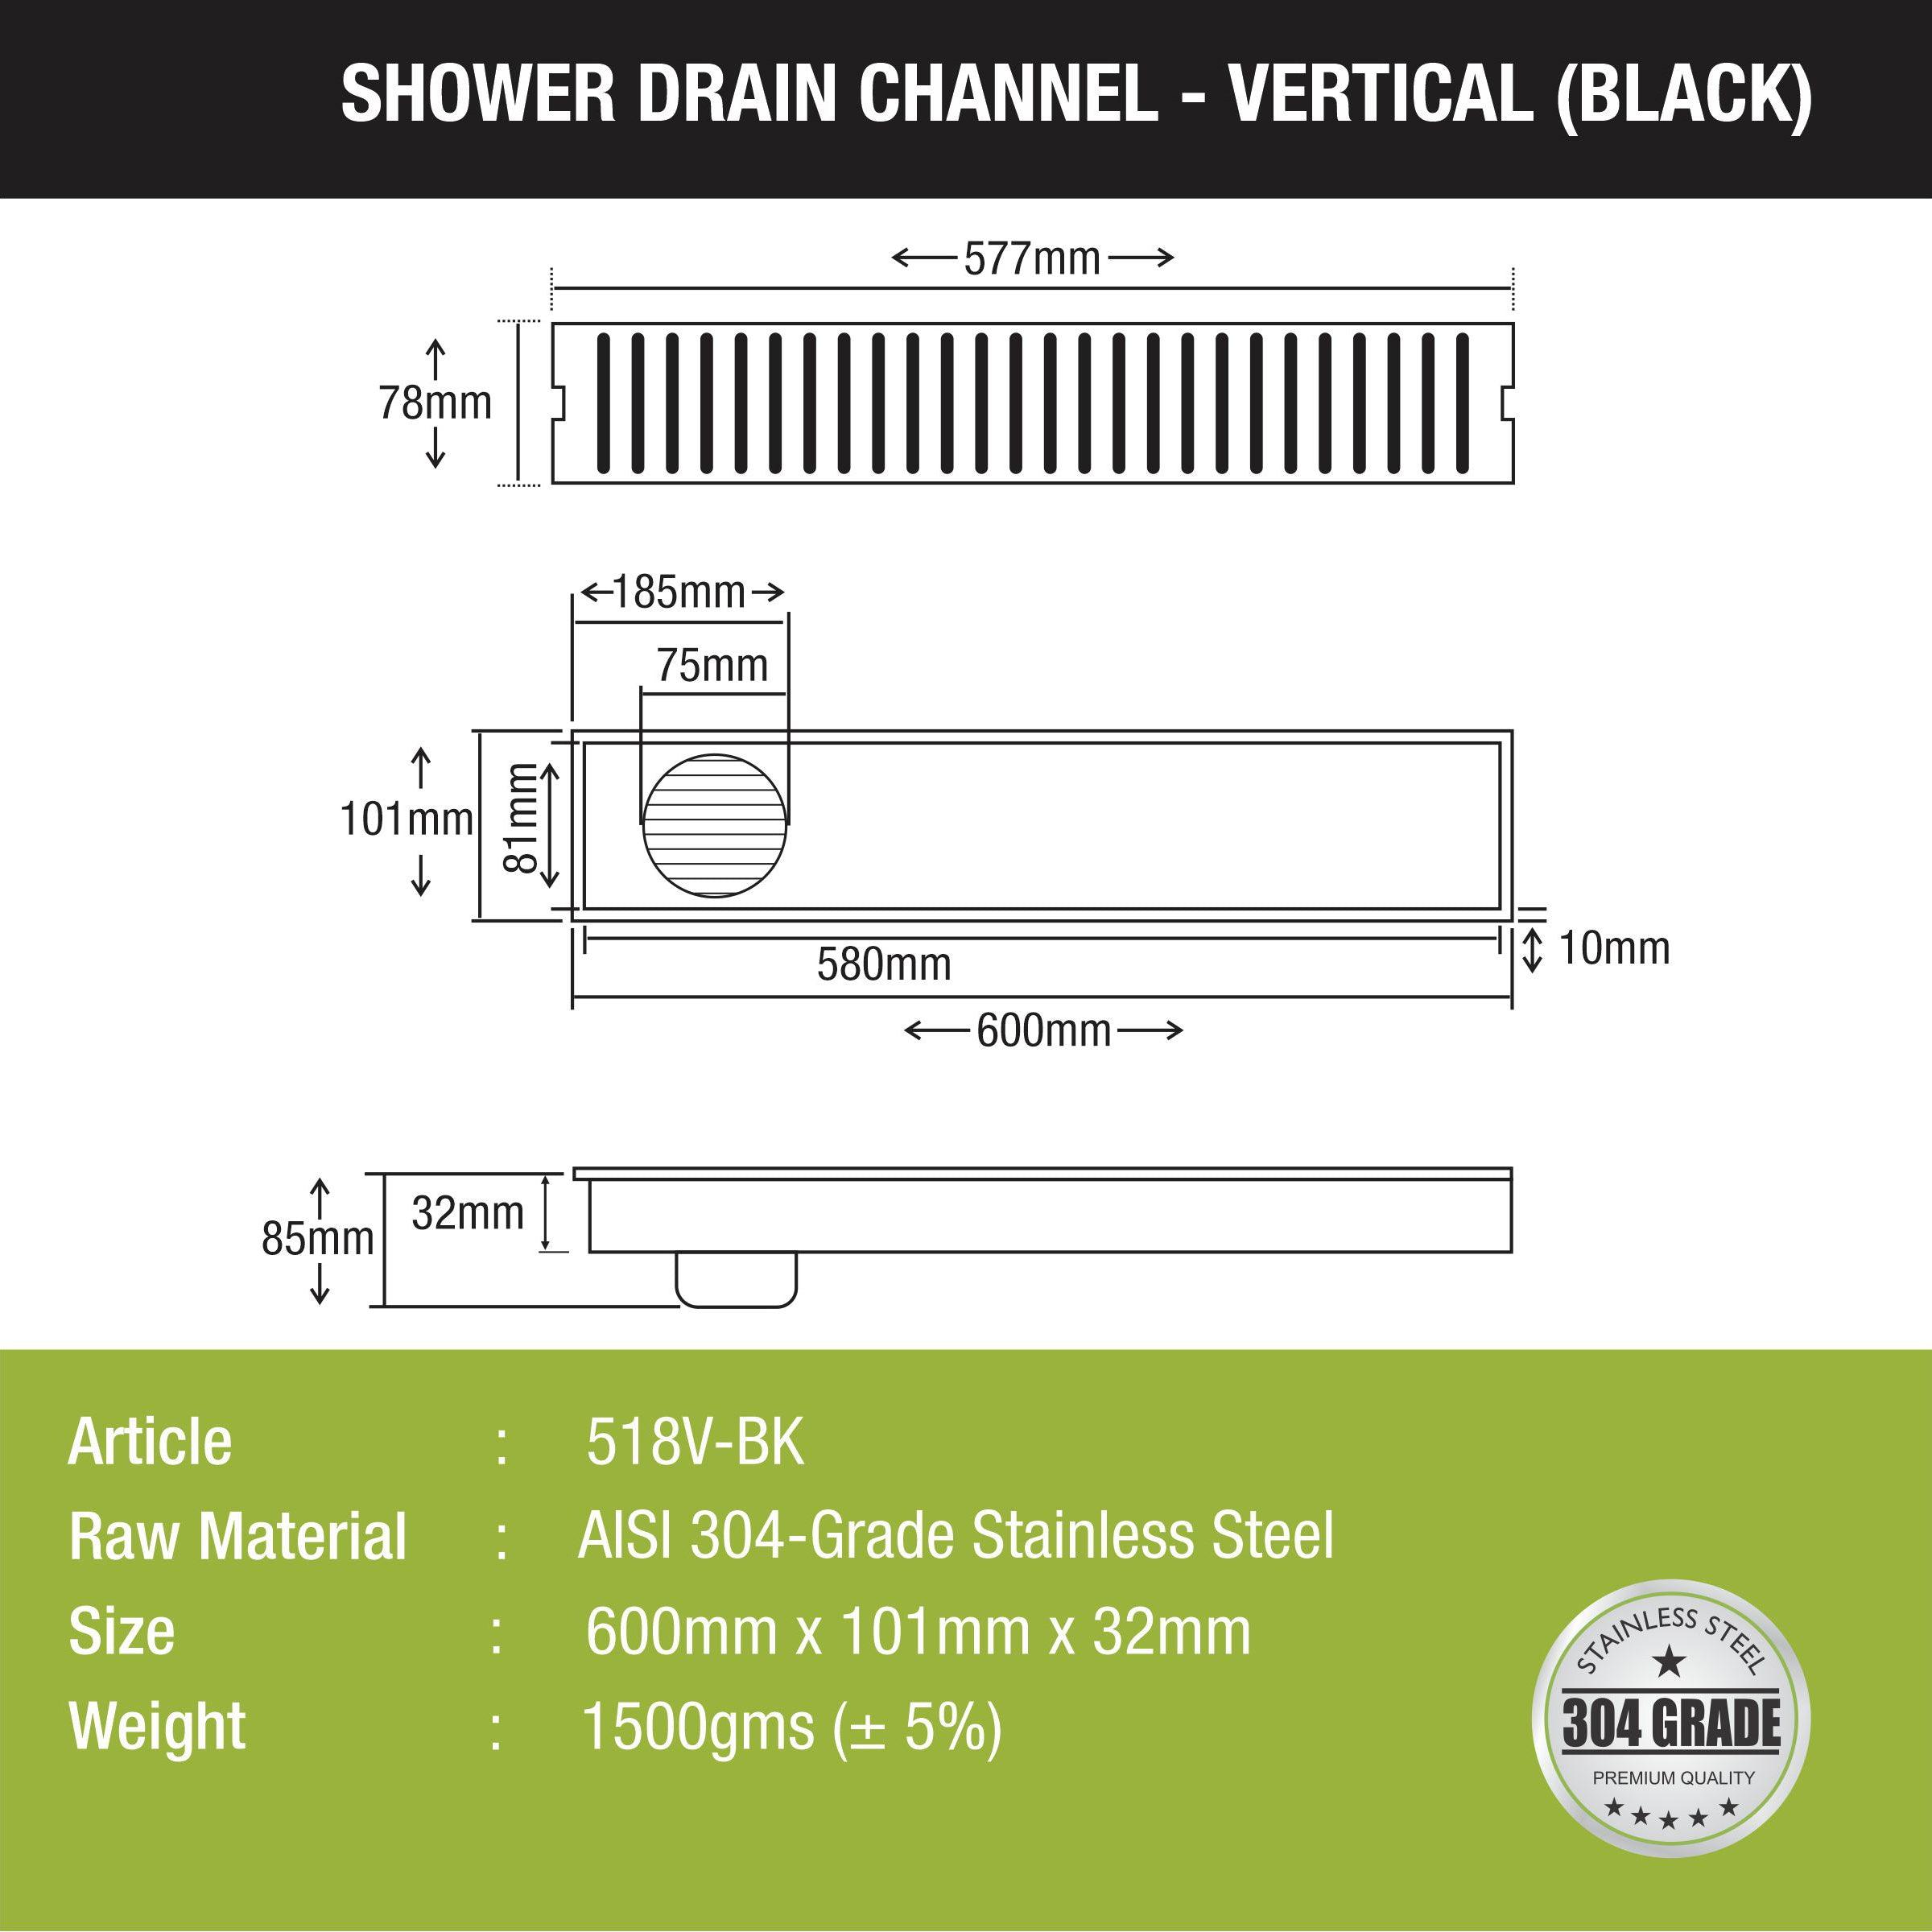 Vertical Shower Drain Channel - Black (24 x 4 Inches) size and measurement 